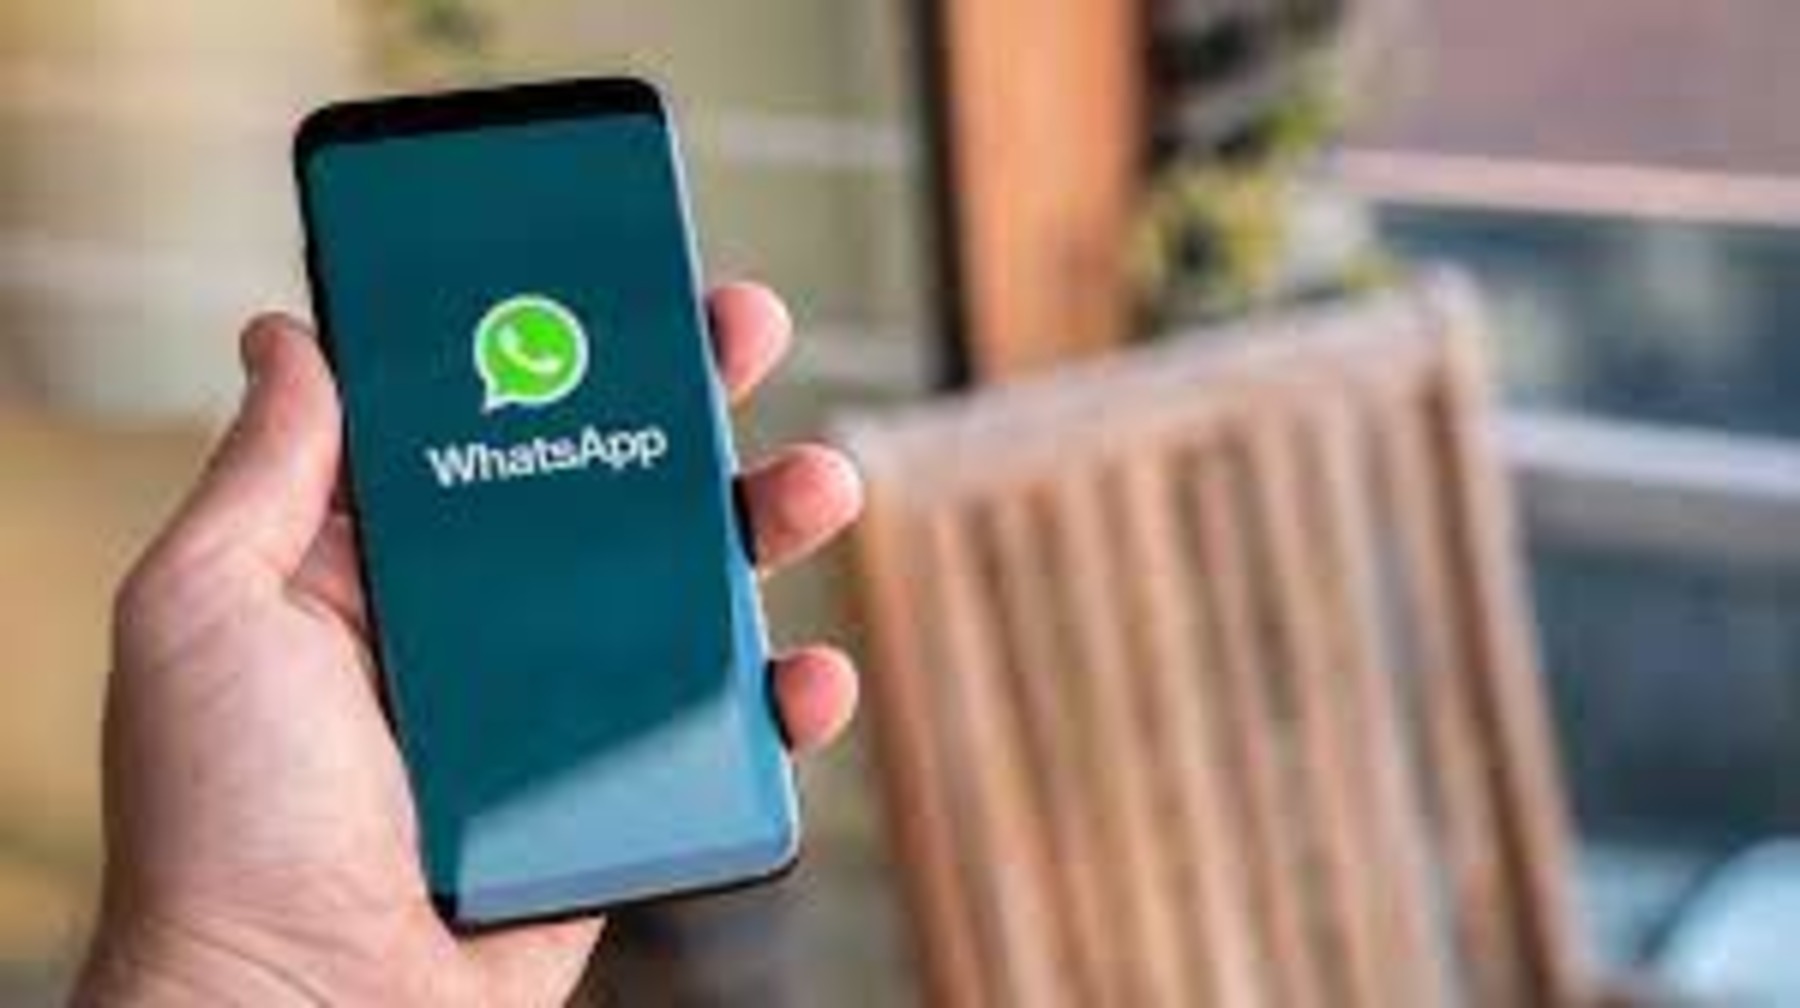 WhatsApp: Archive chats even after new messages